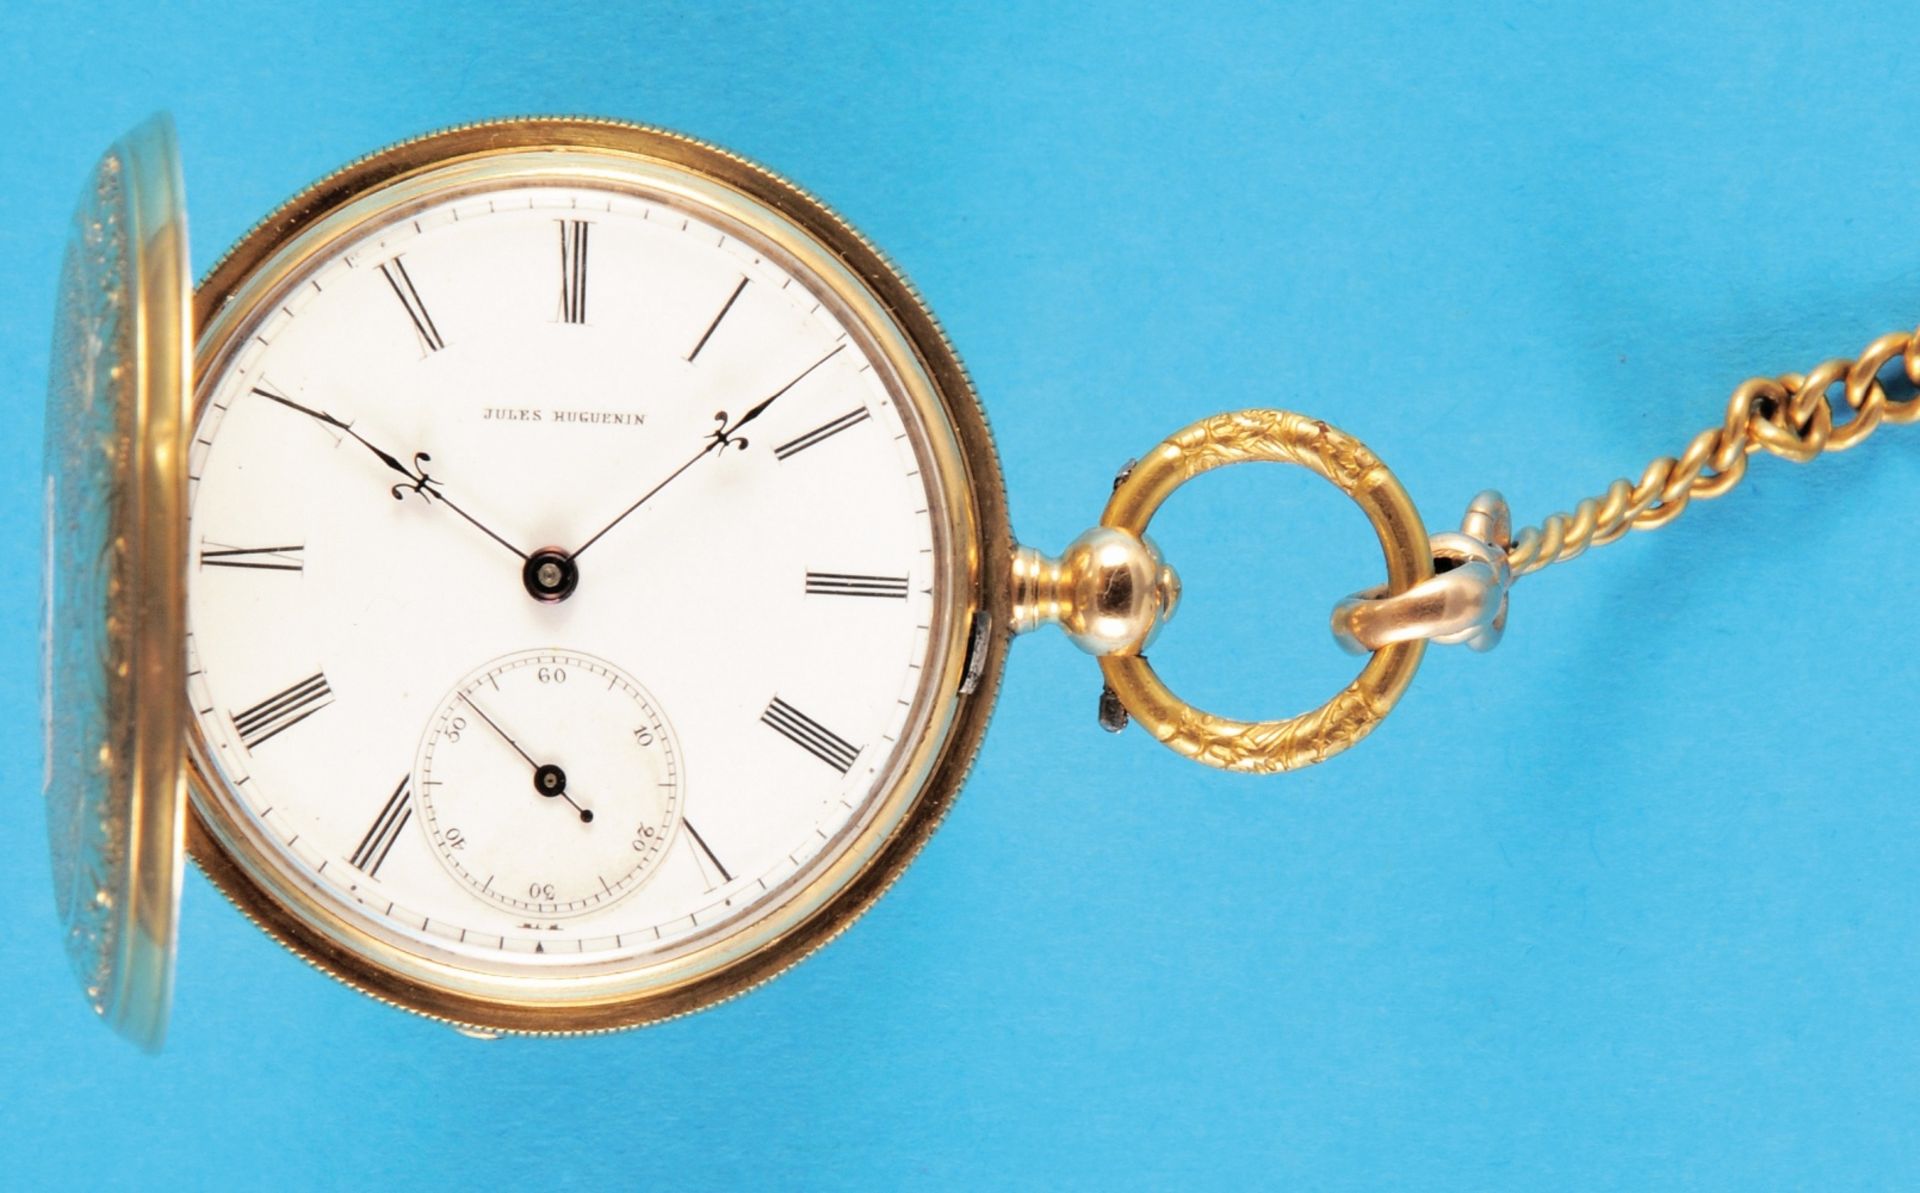 Jules Huguenin, Locle, a small, richly engraved 18 ct. gold pocket watch with keywind and gold-plate